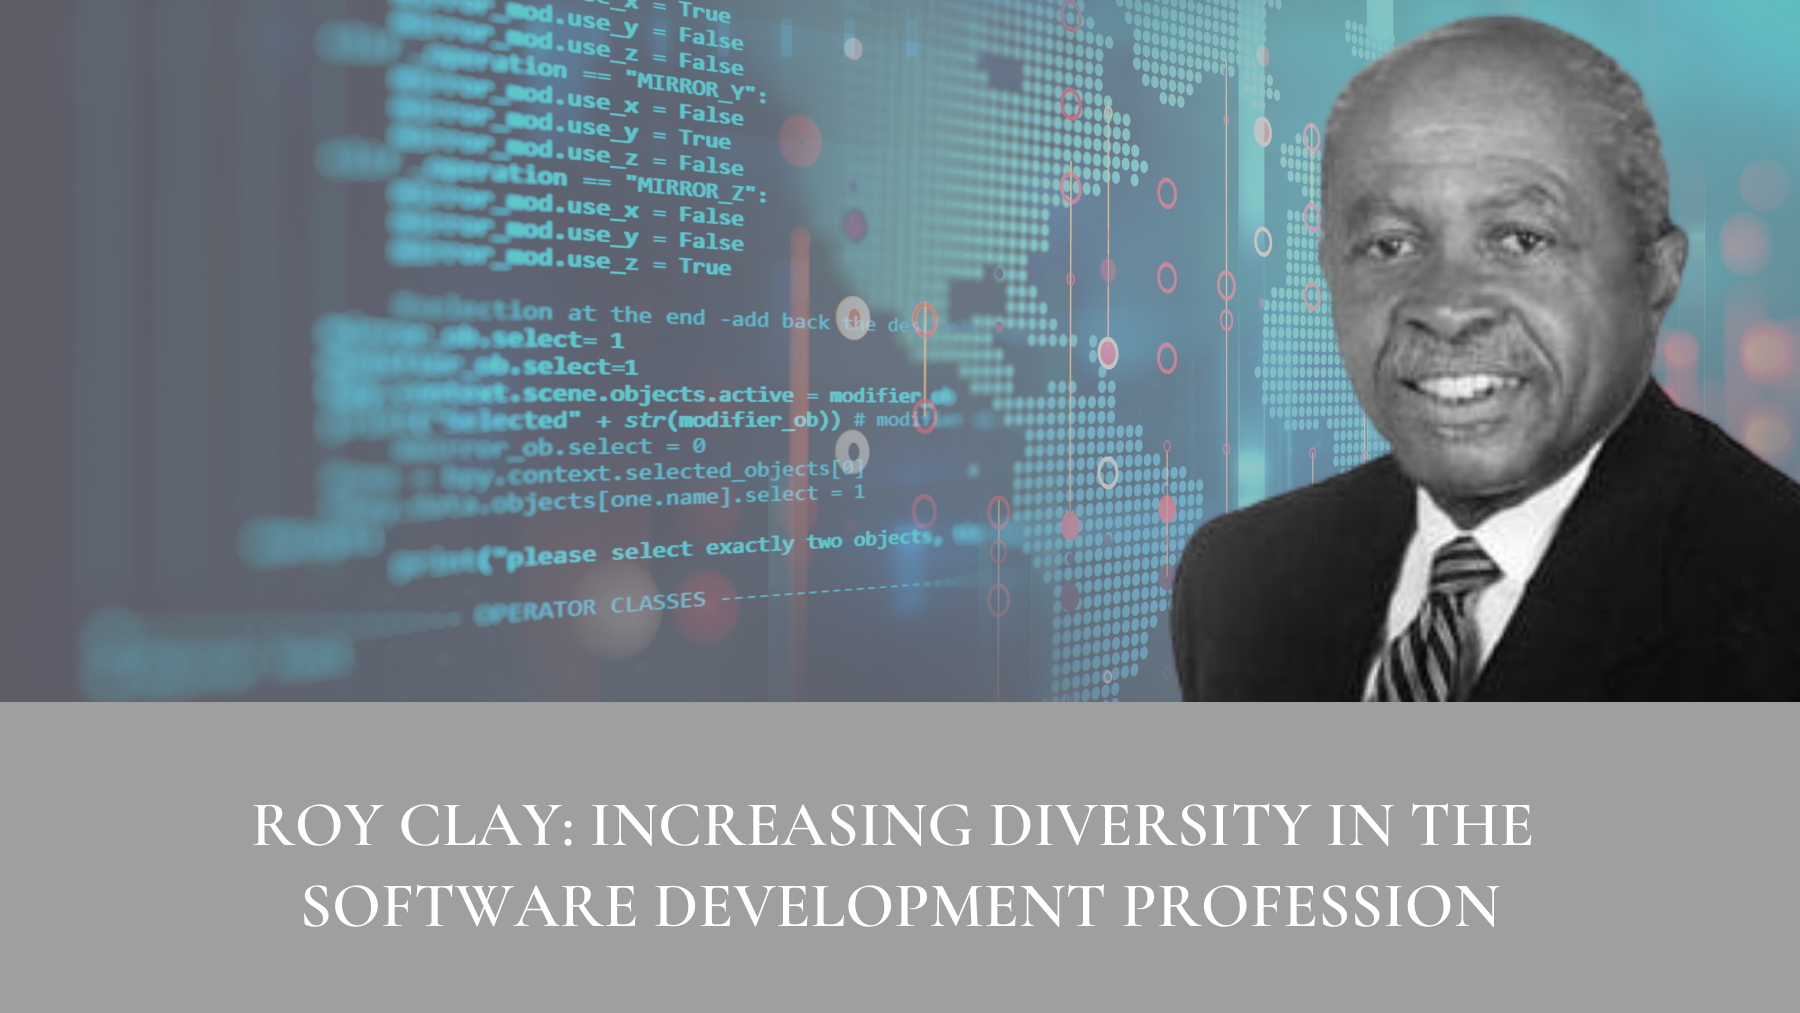 Roy Clay: Increasing Diversity in the Software Engineering Profession